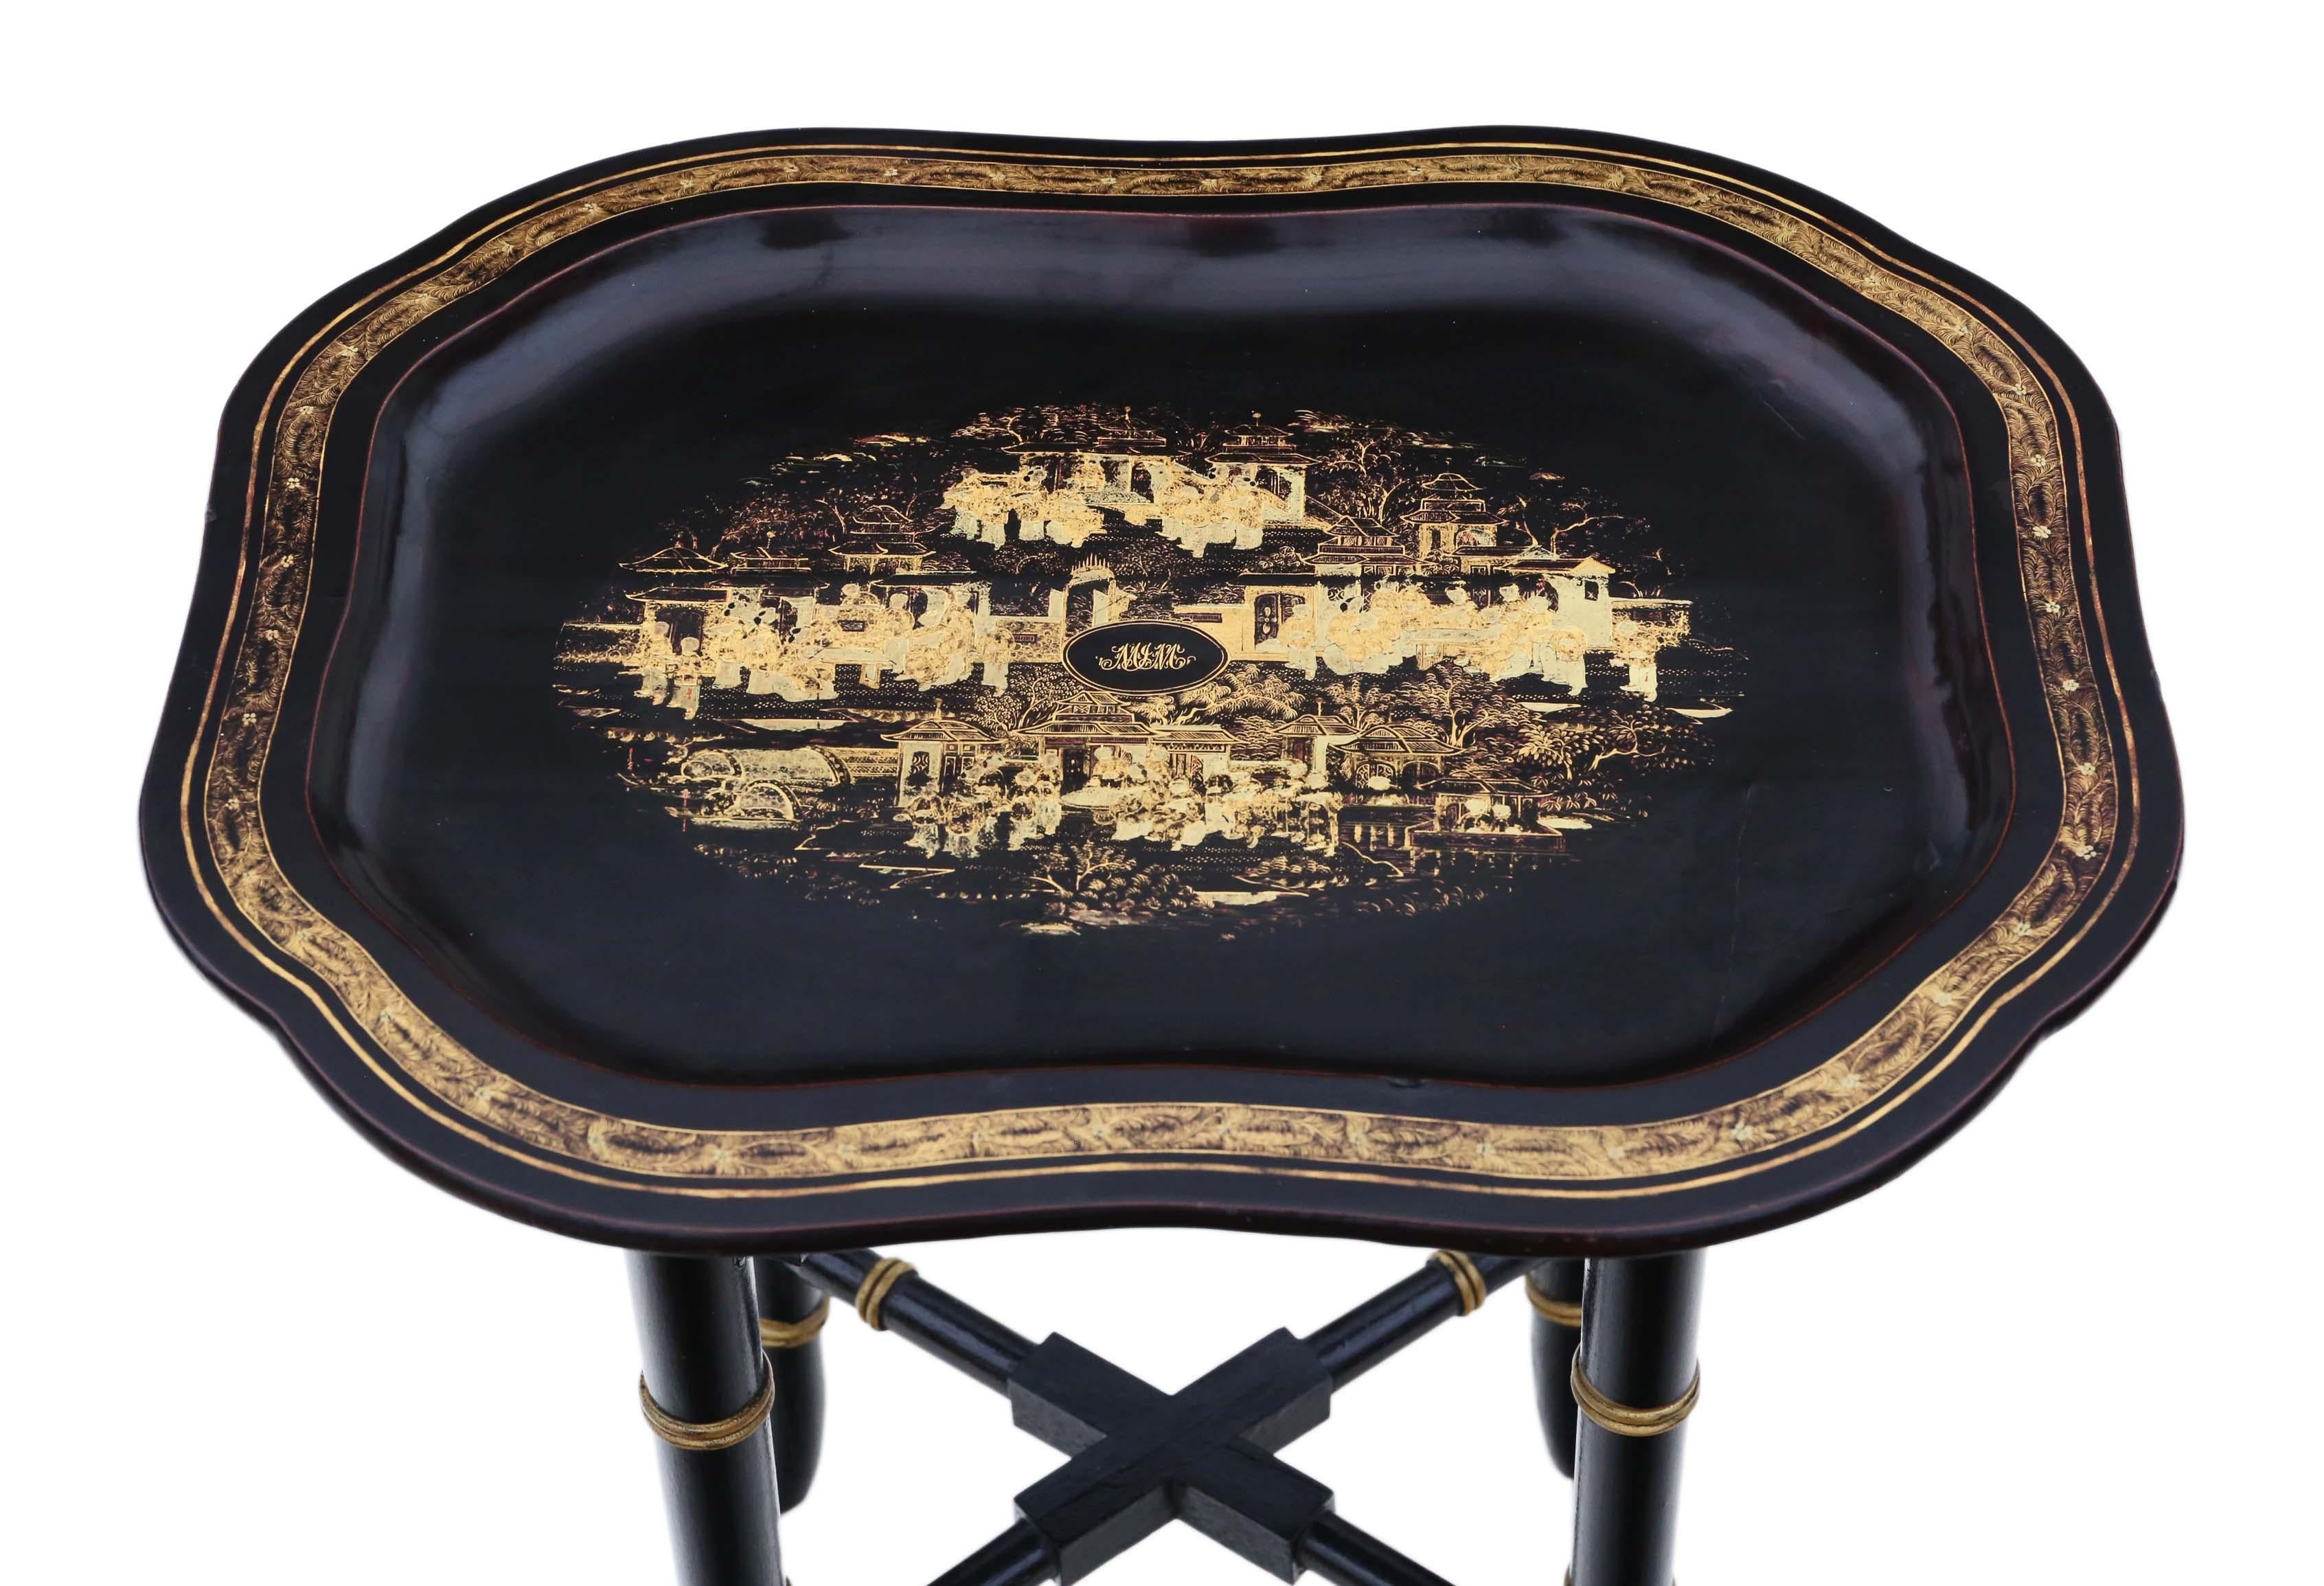 Antique Victorian C1880 boulle work papier-mâché tray on stand, coffee or wine table.

This is a lovely table, that is full of age, charm and character.

Rare and attractive.

The table has no loose joints or woodworm.

Lovely patina and